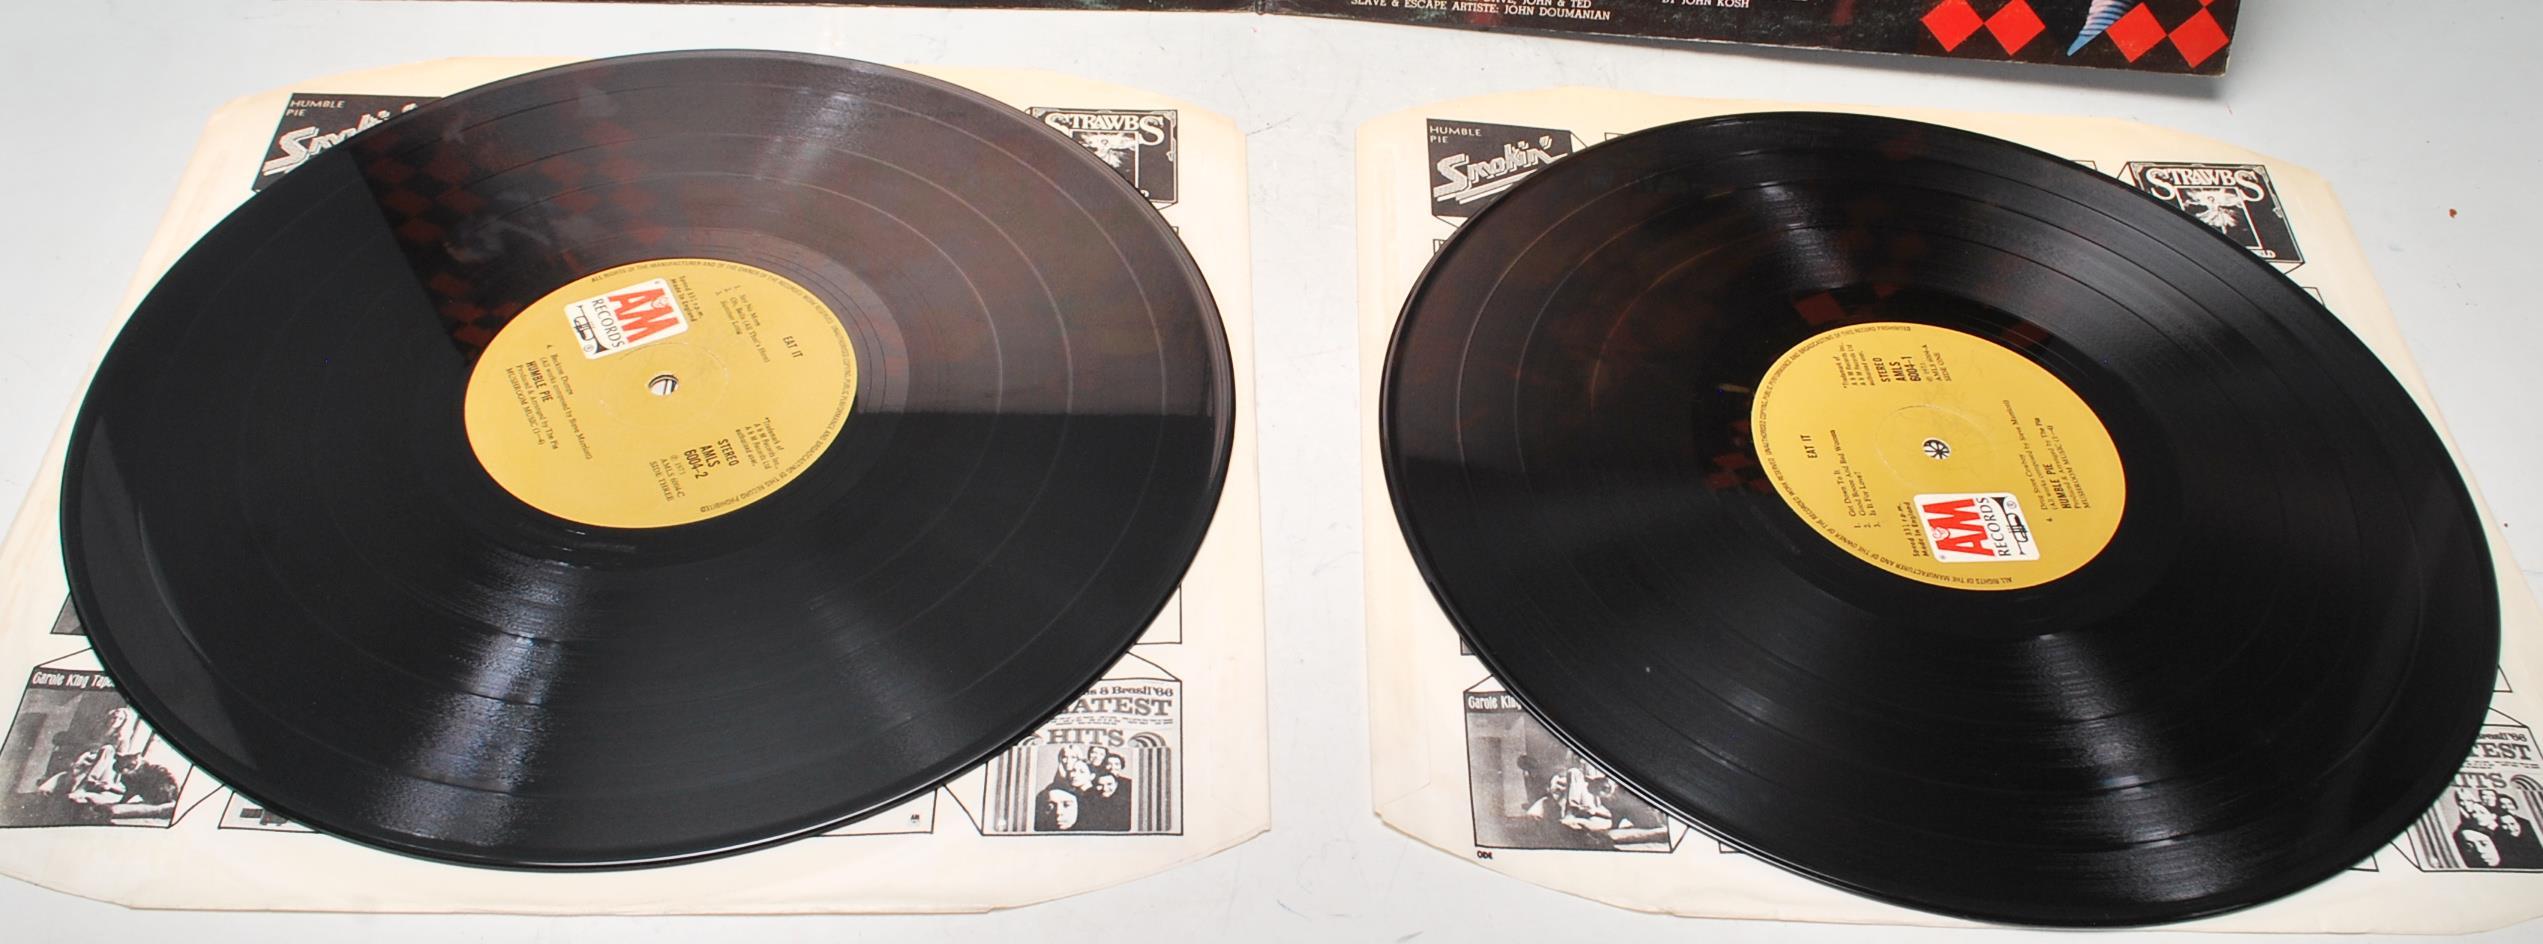 HUMBLE PIE - TWO VINYL RECORD LPS - EAT IT & ROCKIN' THE FILLMORE - Image 5 of 9